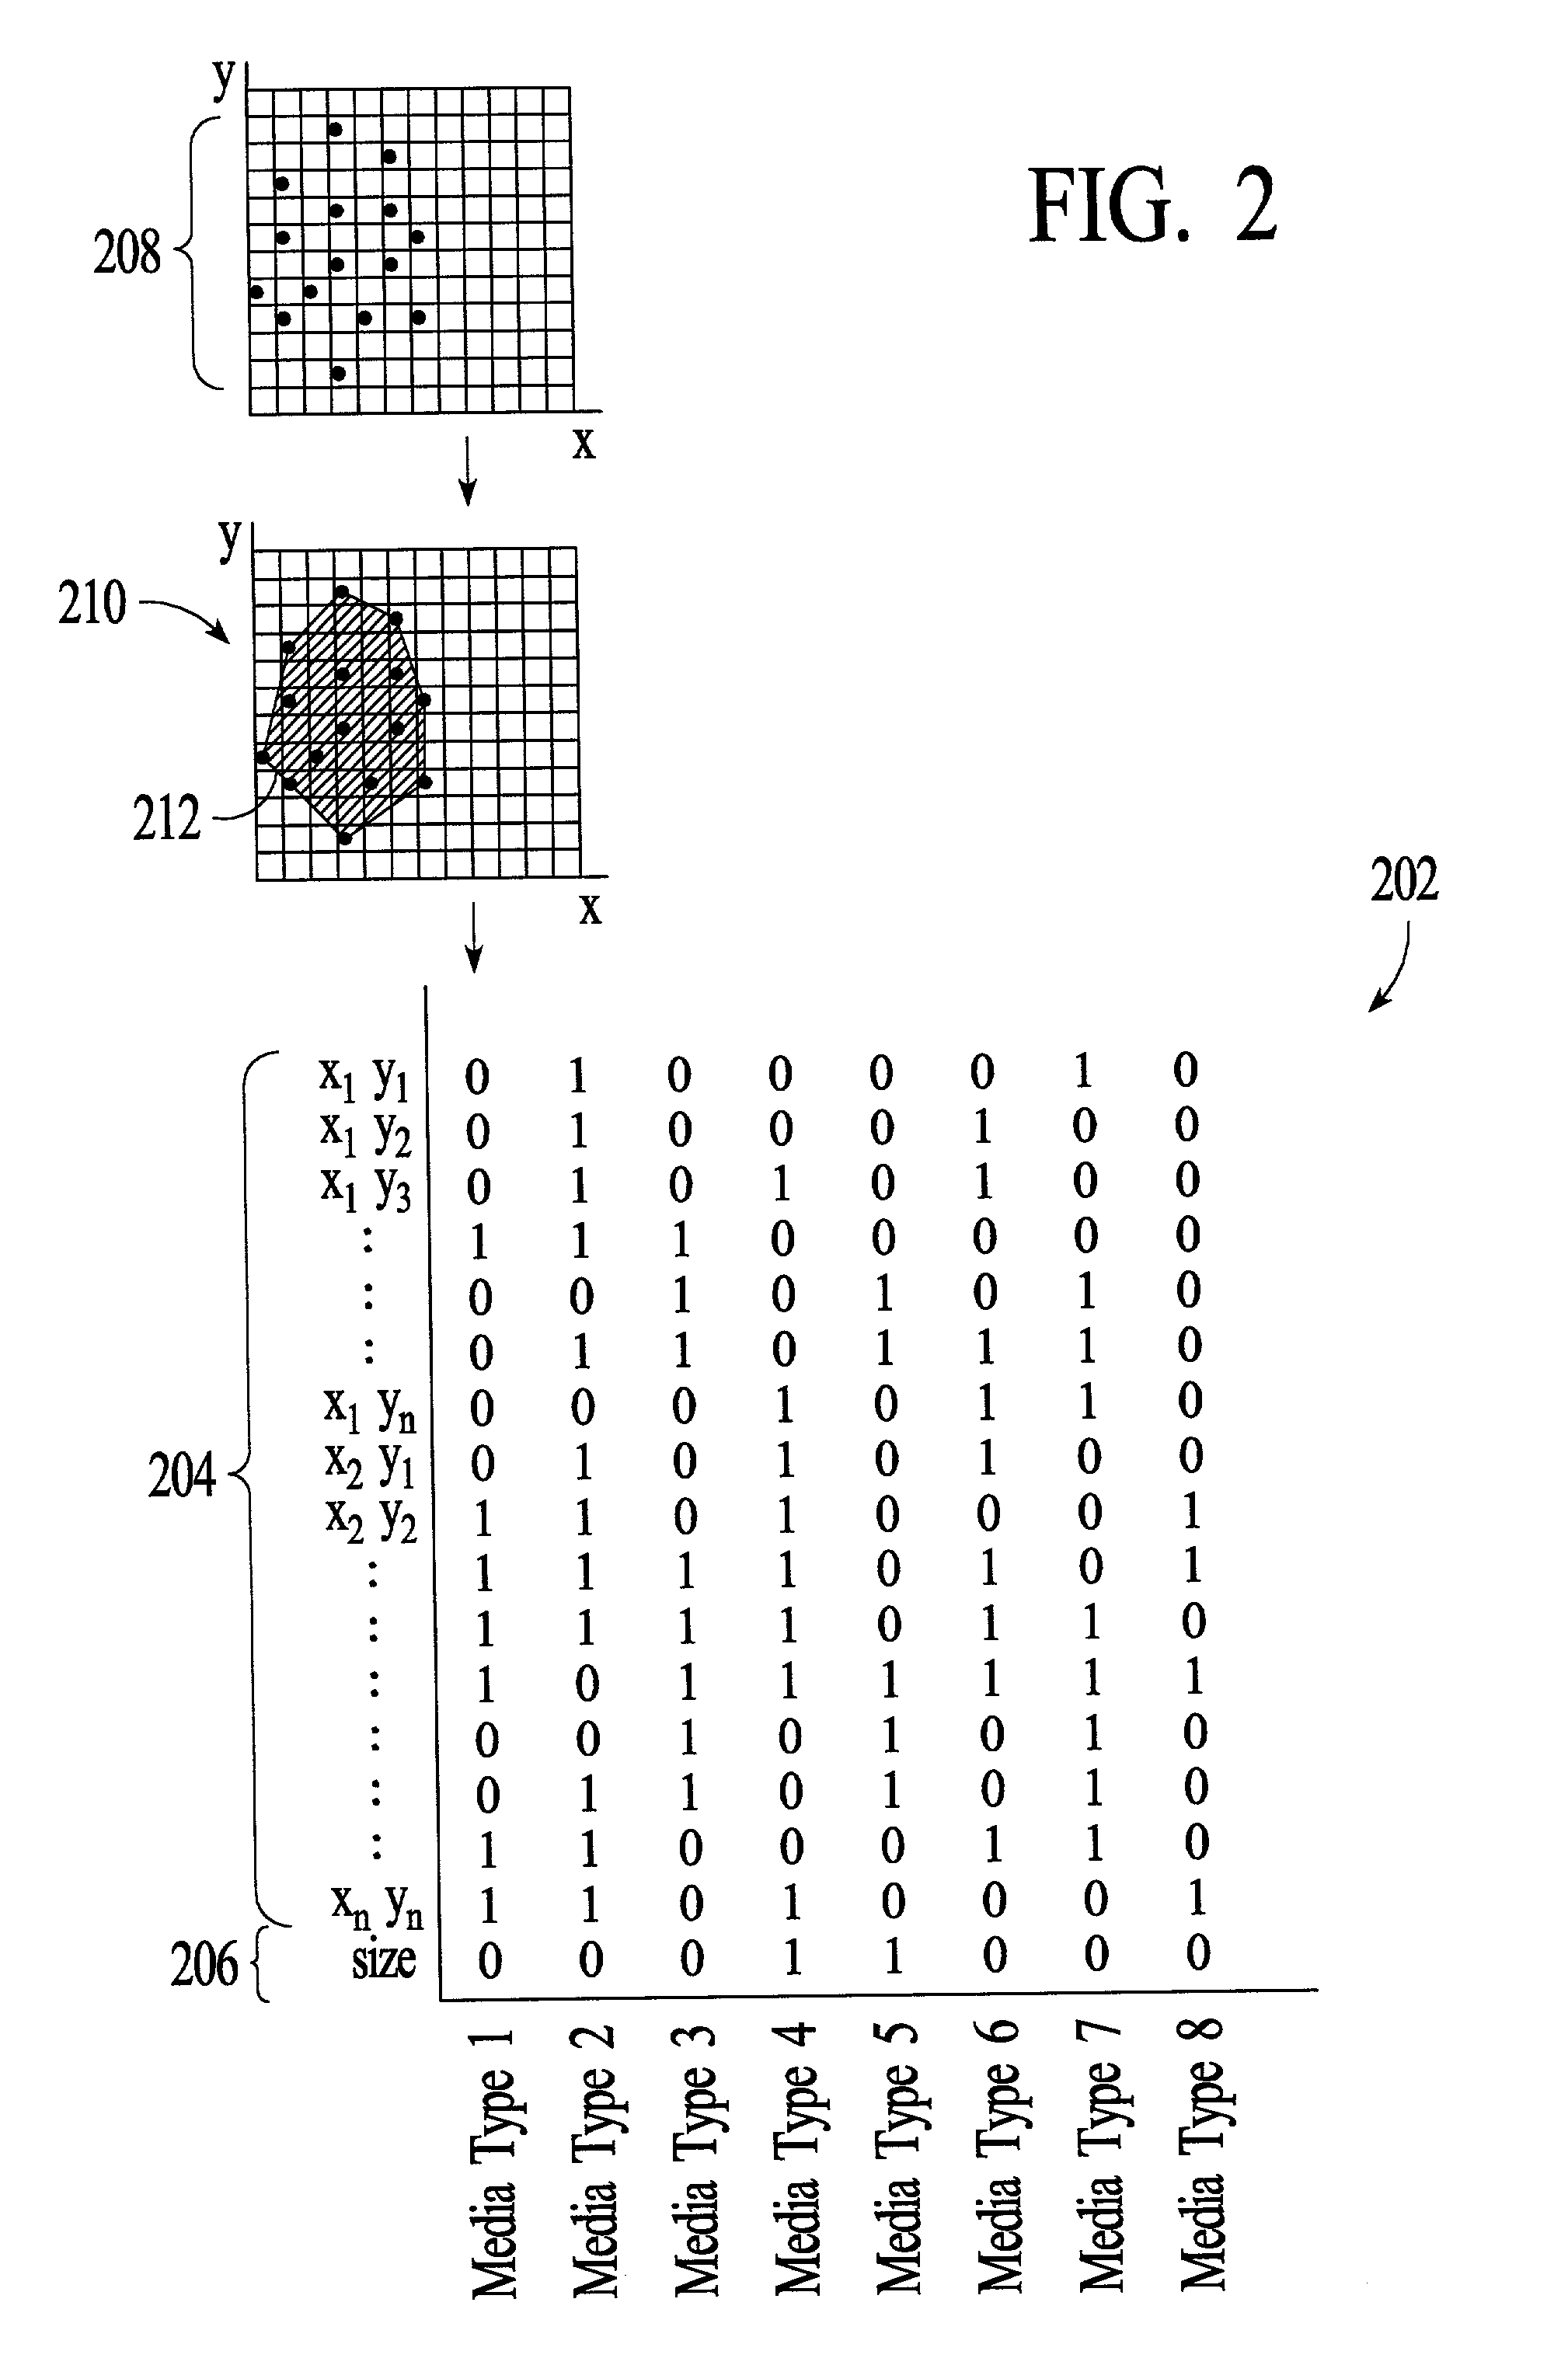 System and method for color correcting electronically captured images by determining input media types using color correlation matrix